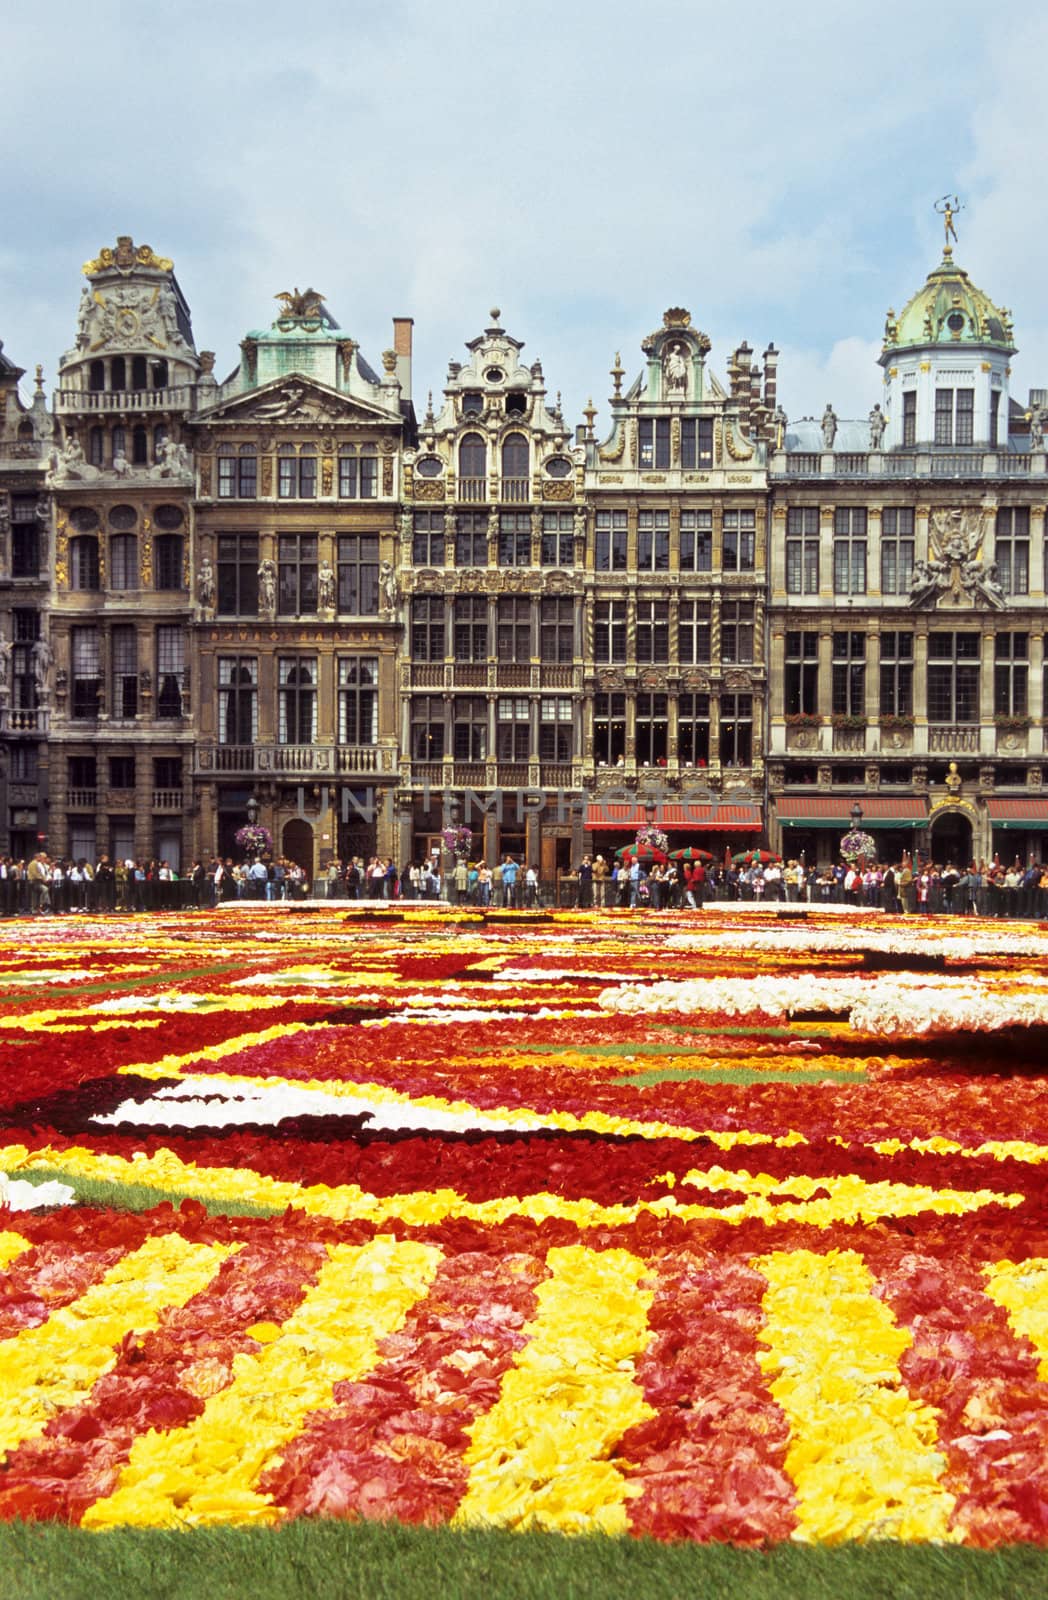 The Brussels flower carpet is designed of Begonias every second year in the central square - Grand Place. It is surrounded by guild houses and tourists.